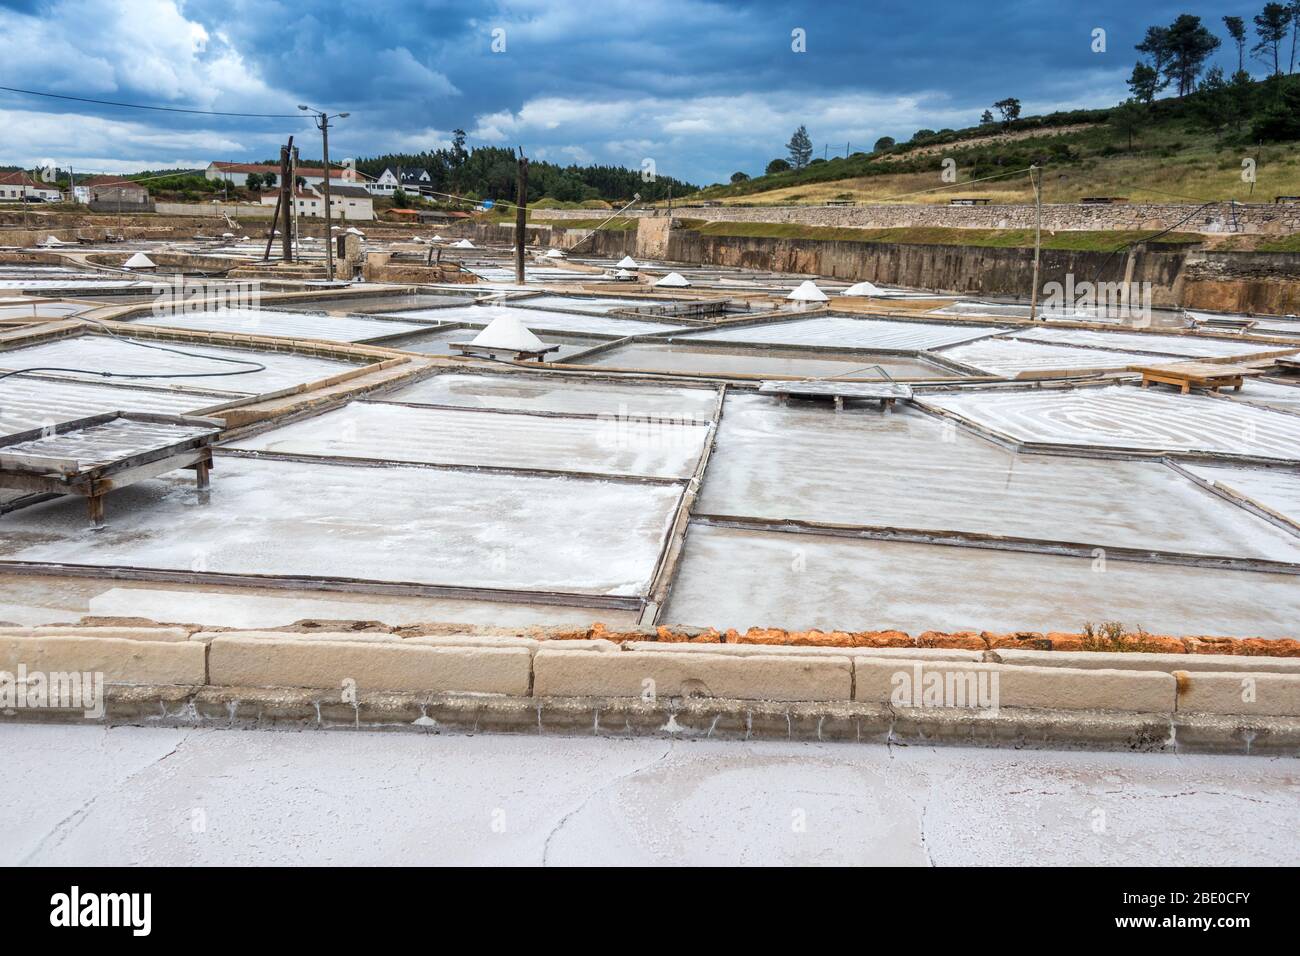 Salt production using traditional method from the salt springs (inland salinas) at Rio Maior Salt Pans Portugal. Stock Photo